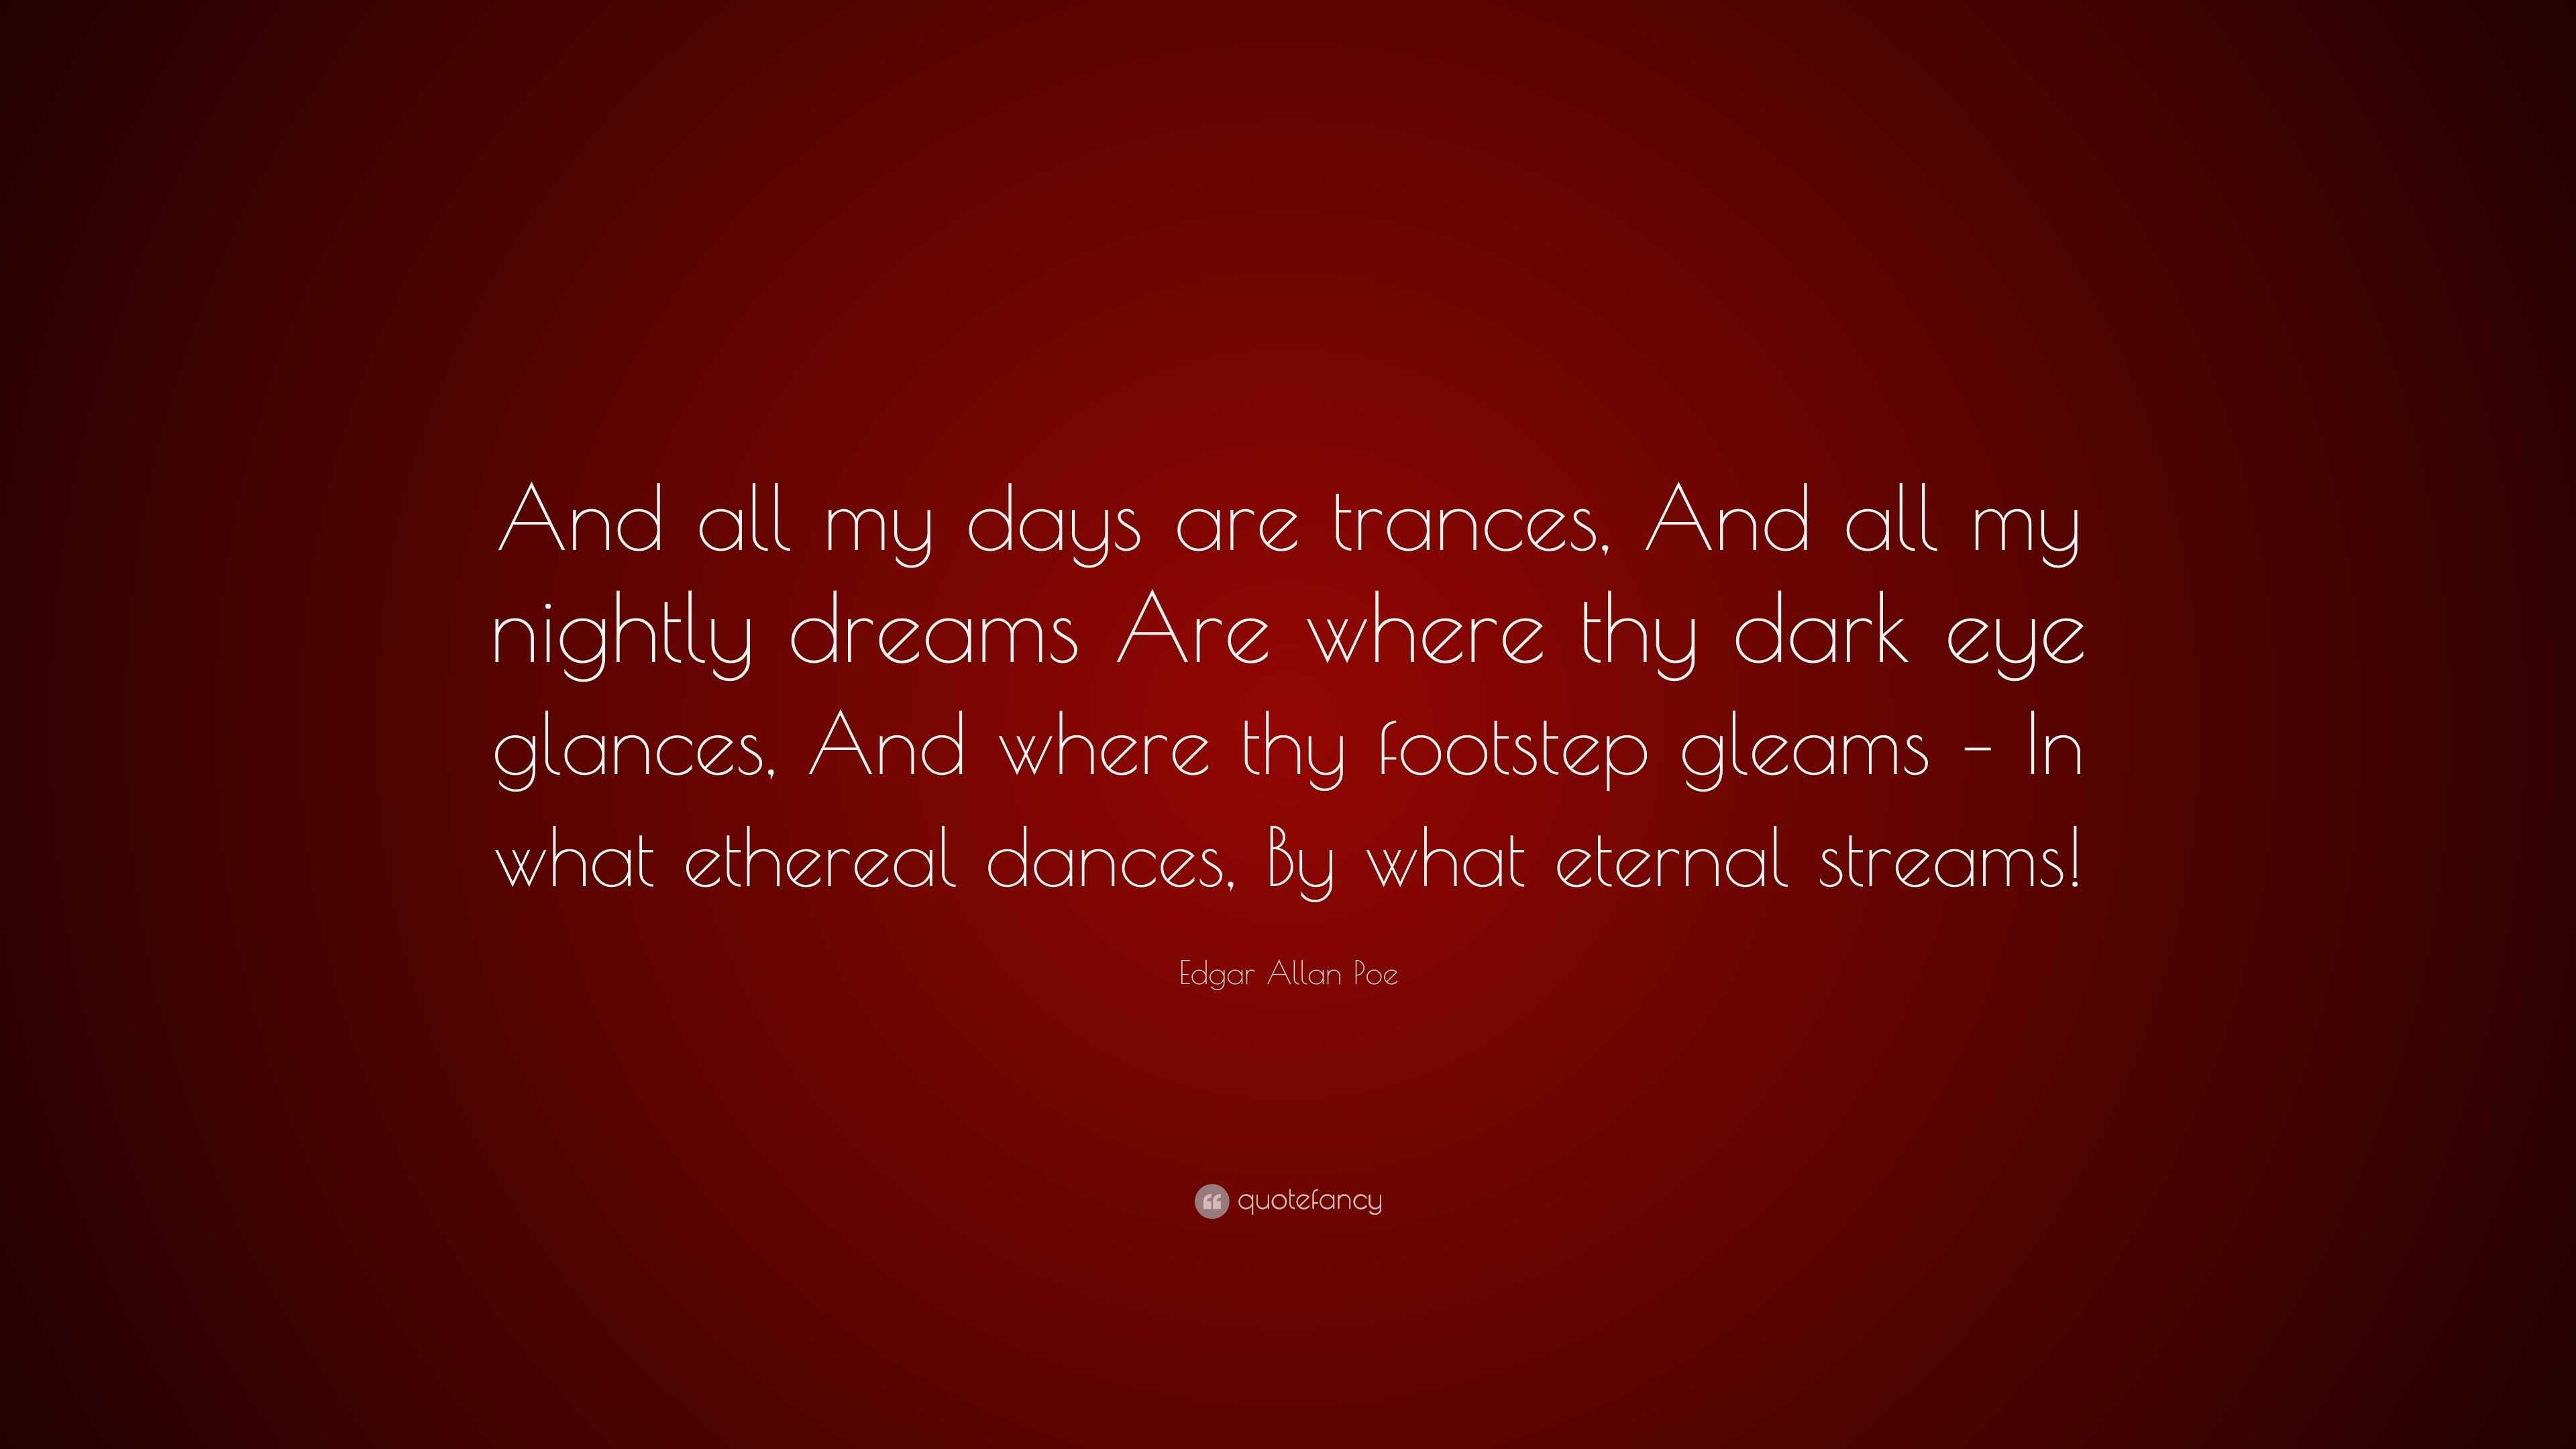 Edgar Allan Poe Quote: “And all my days are trances, And all my nightly ...